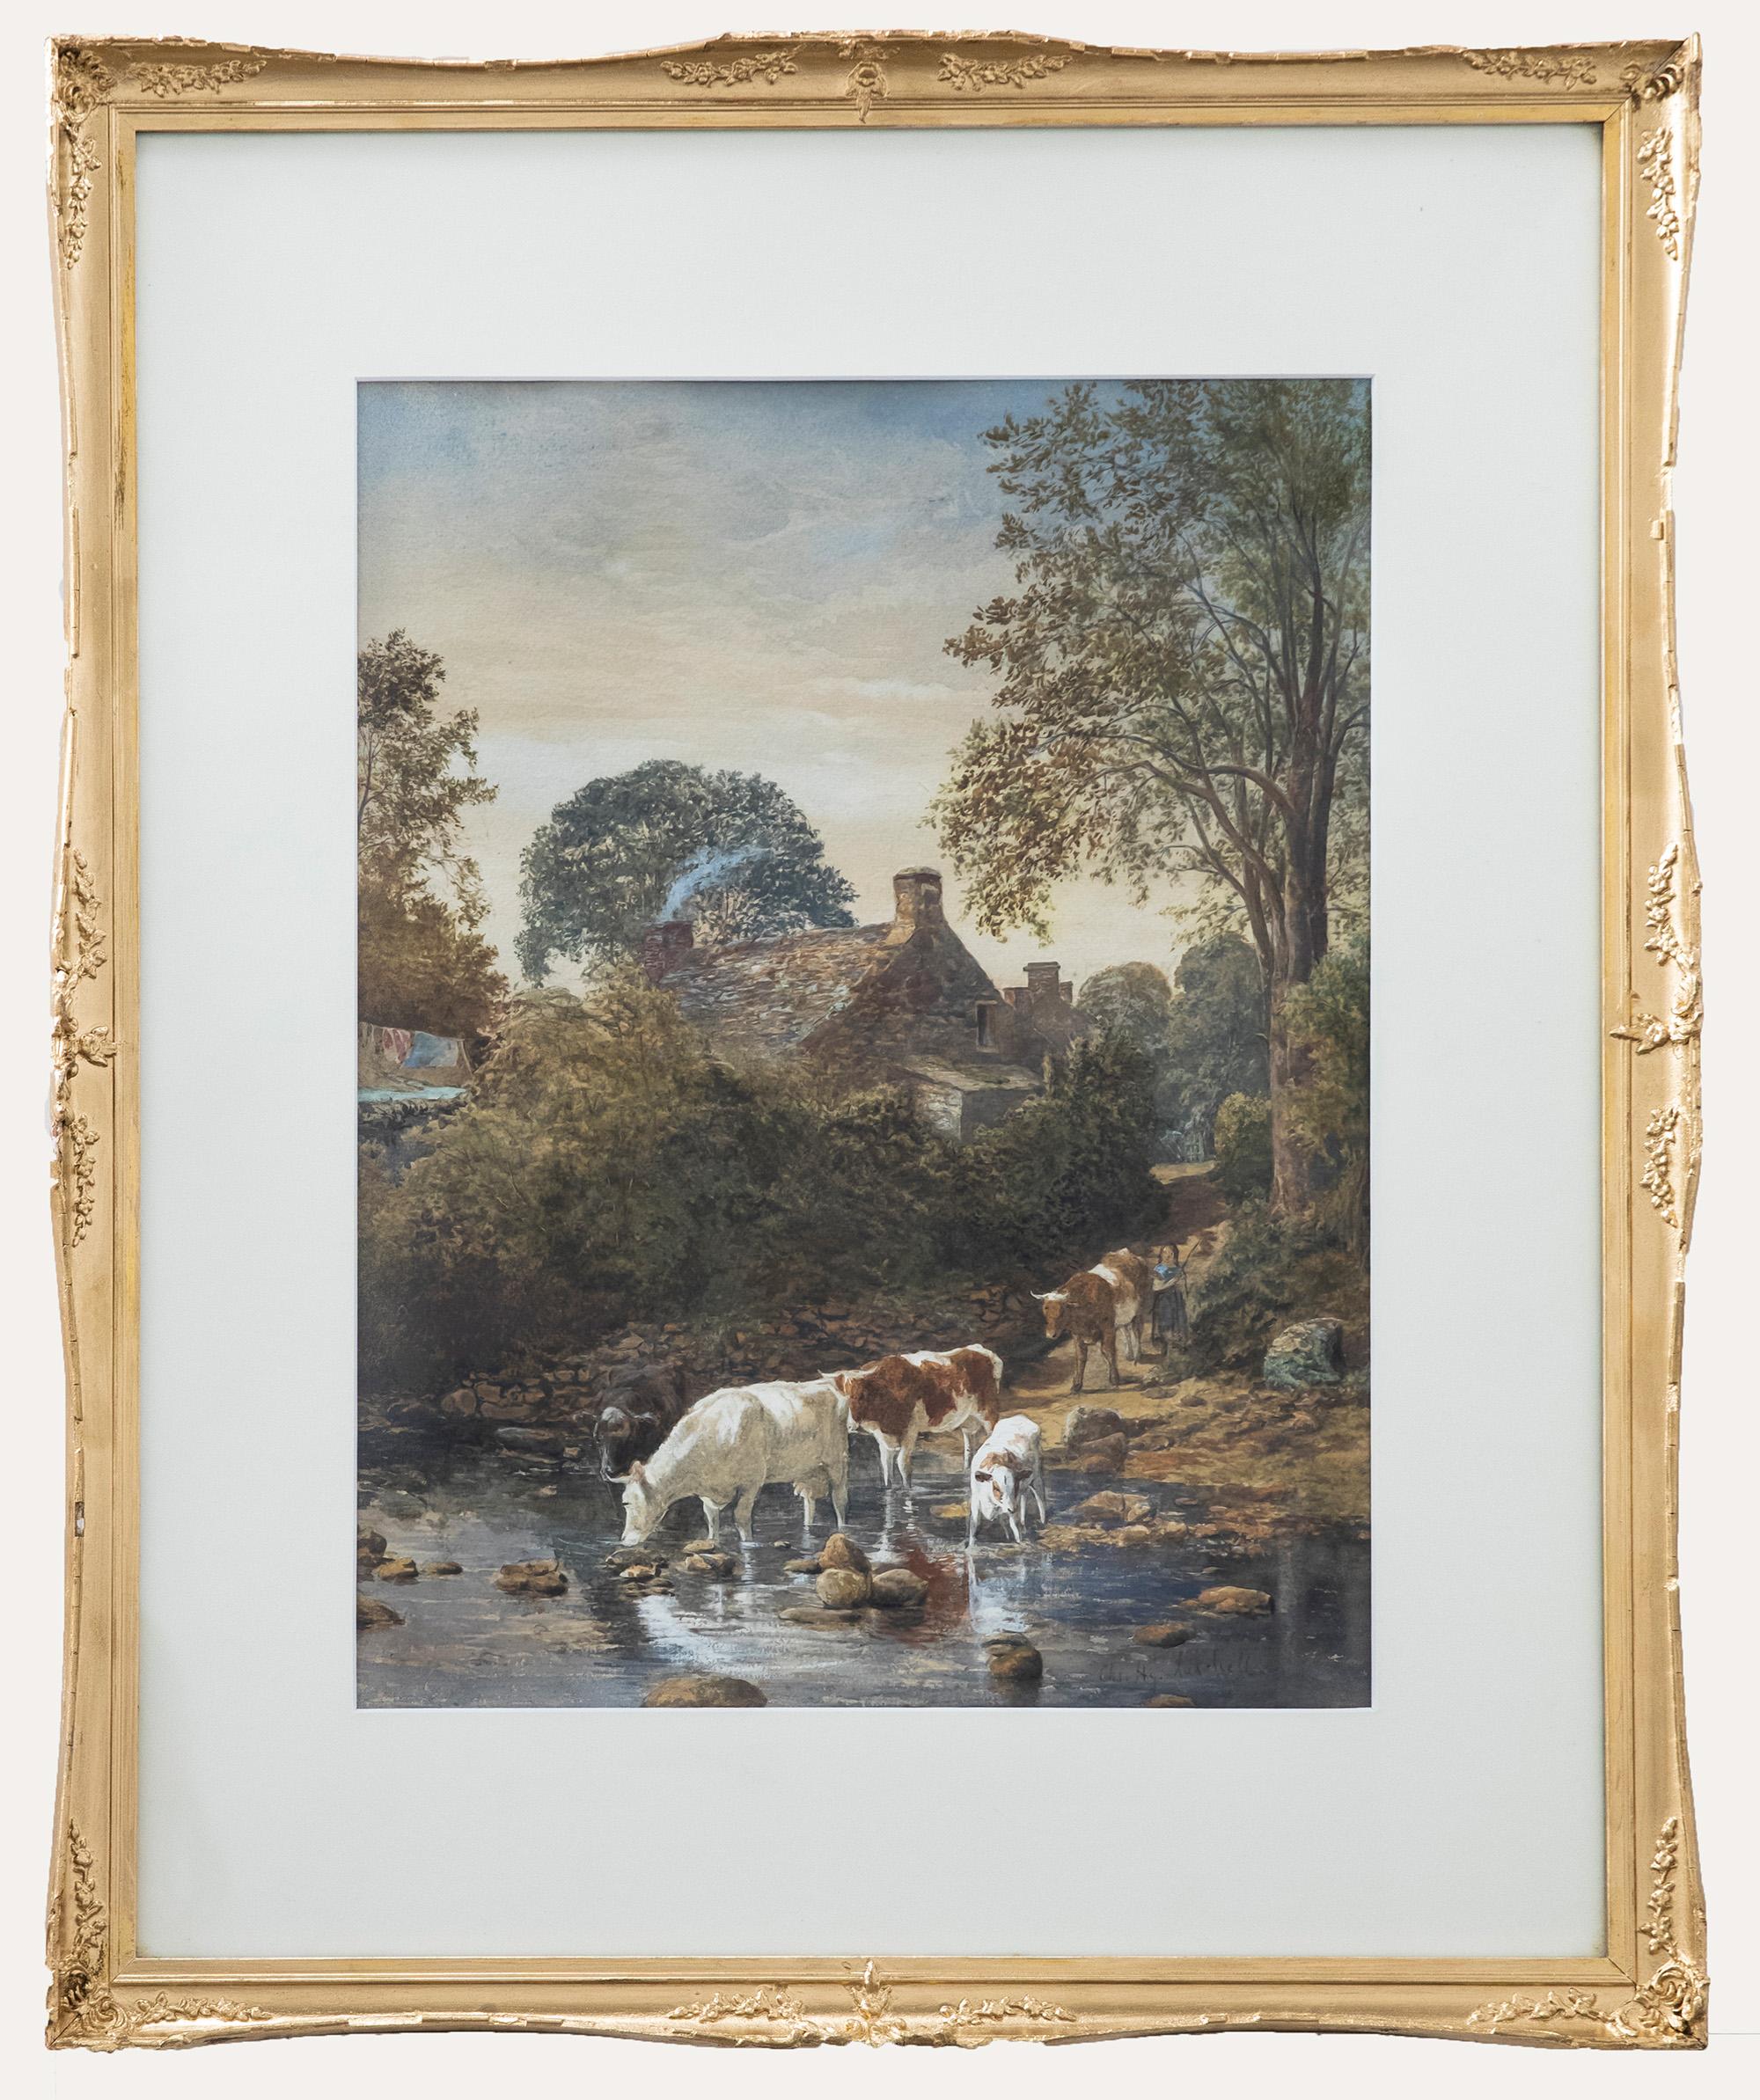 A fine rural watercolour by the 19th century artist Charles Lutchell. This charming scene depicts a young women herding cattle down to a shallow ford. The painting has been carefully heighten with body color by the artist. Signed to the lower right.